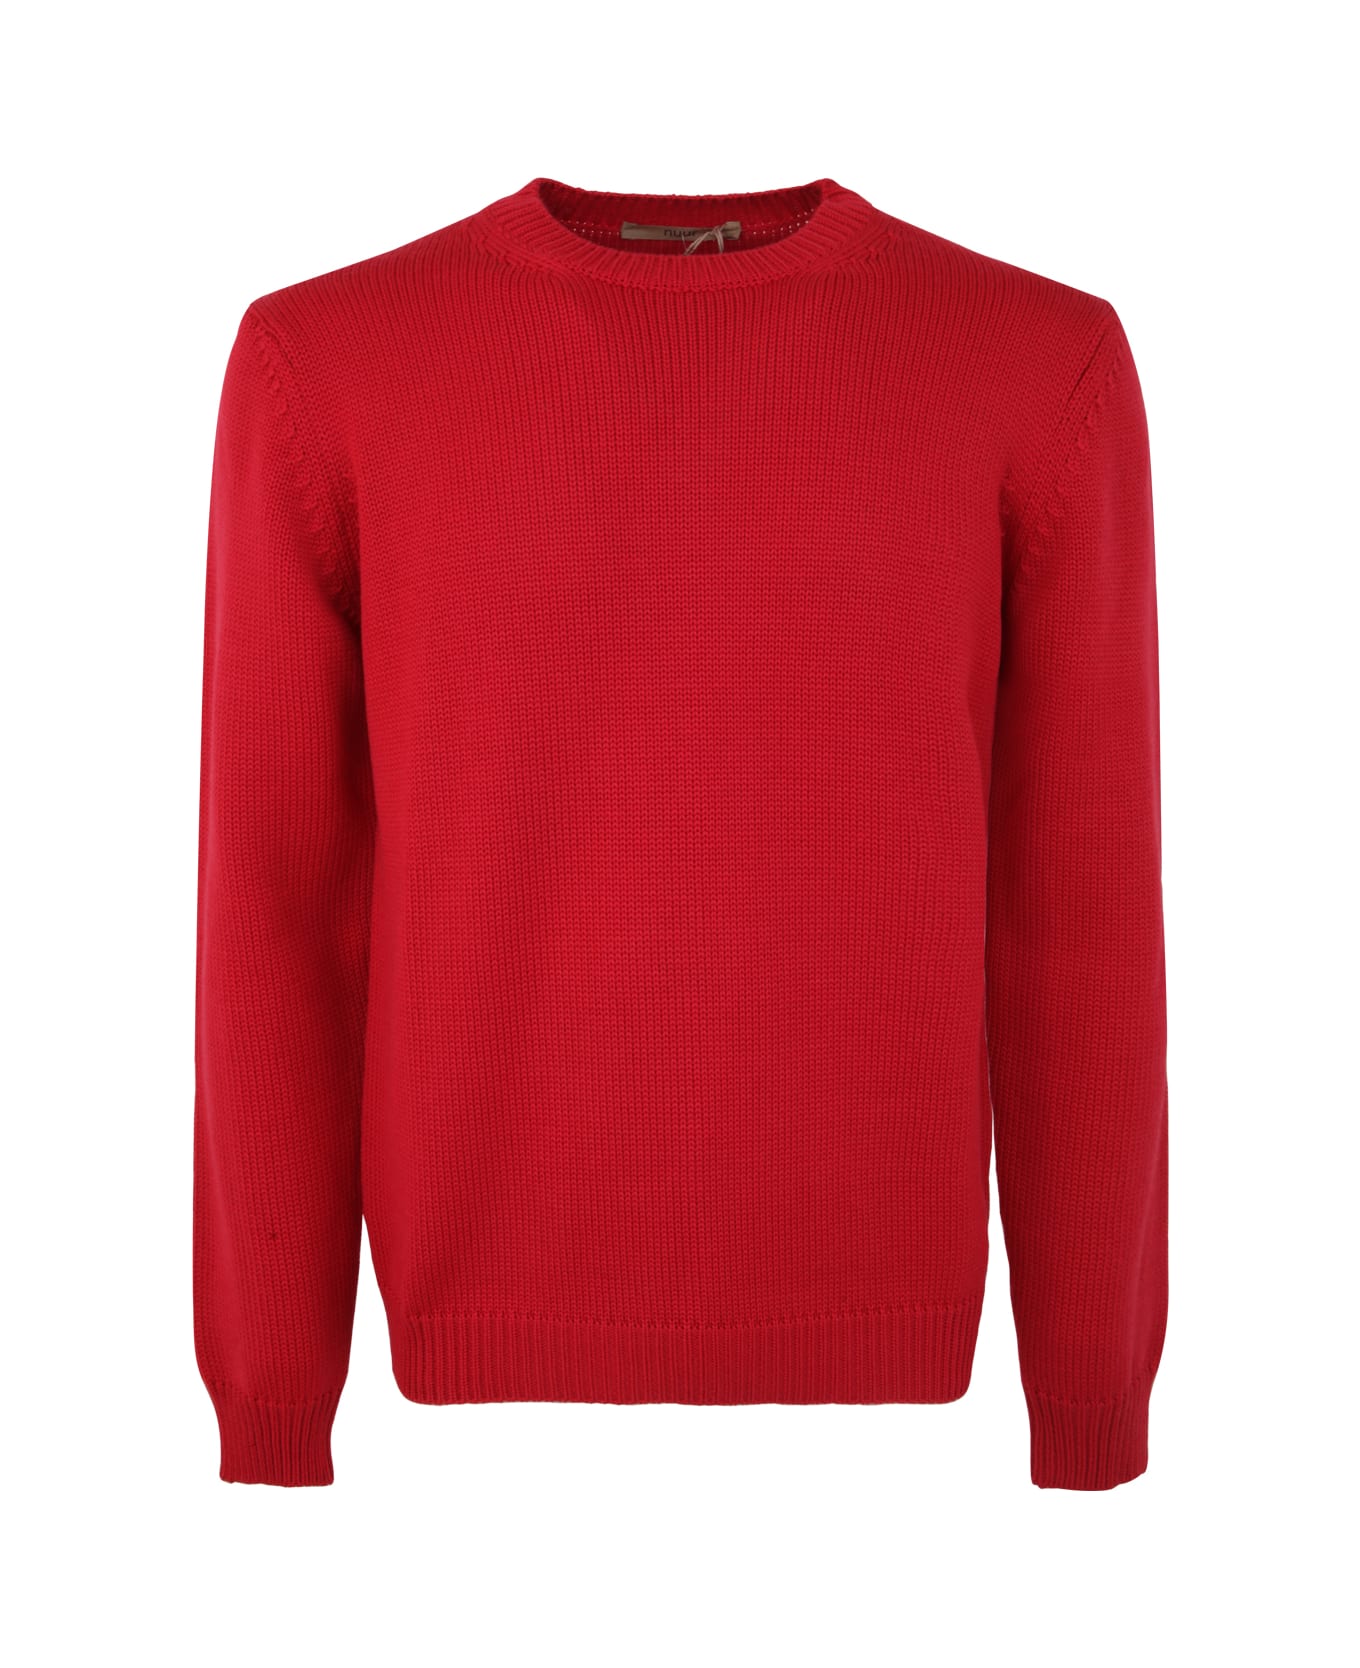 Nuur Long Sleeve Crew Neck Sweater - Red